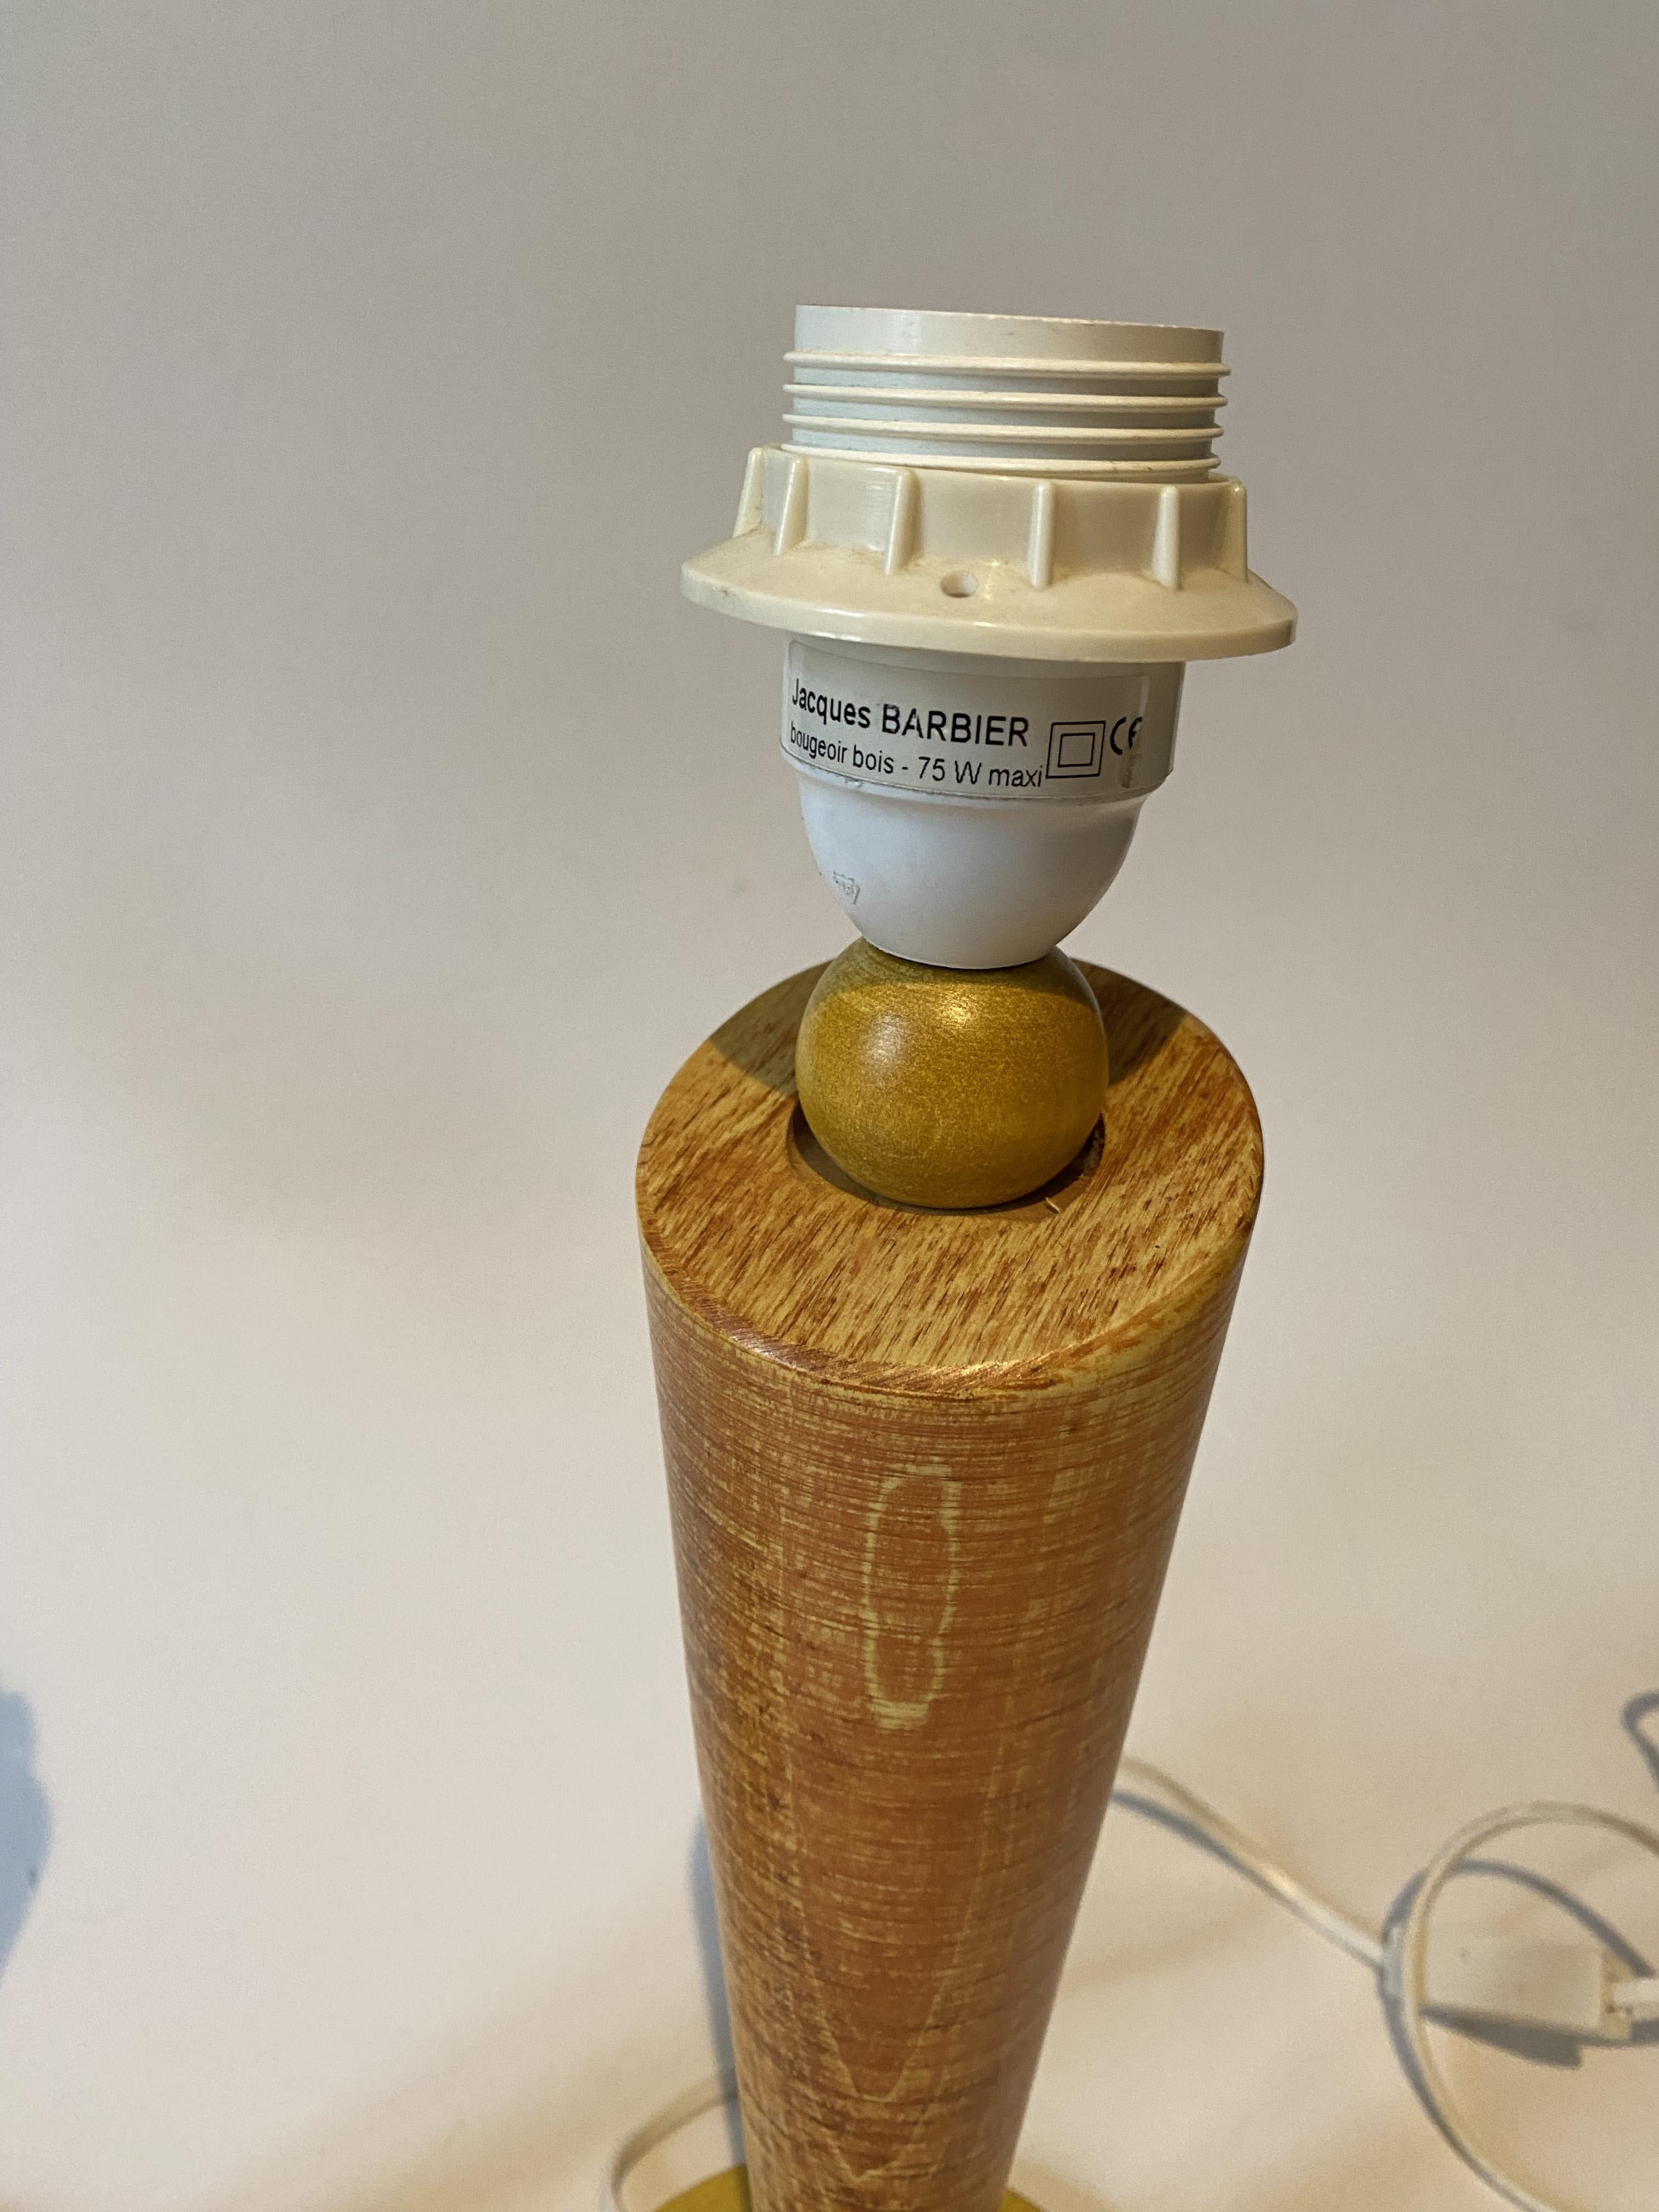 Post-Modern Postmodern Lamps in Wood, style of Memphis Milano or Olivier Villatte, 1980s. For Sale